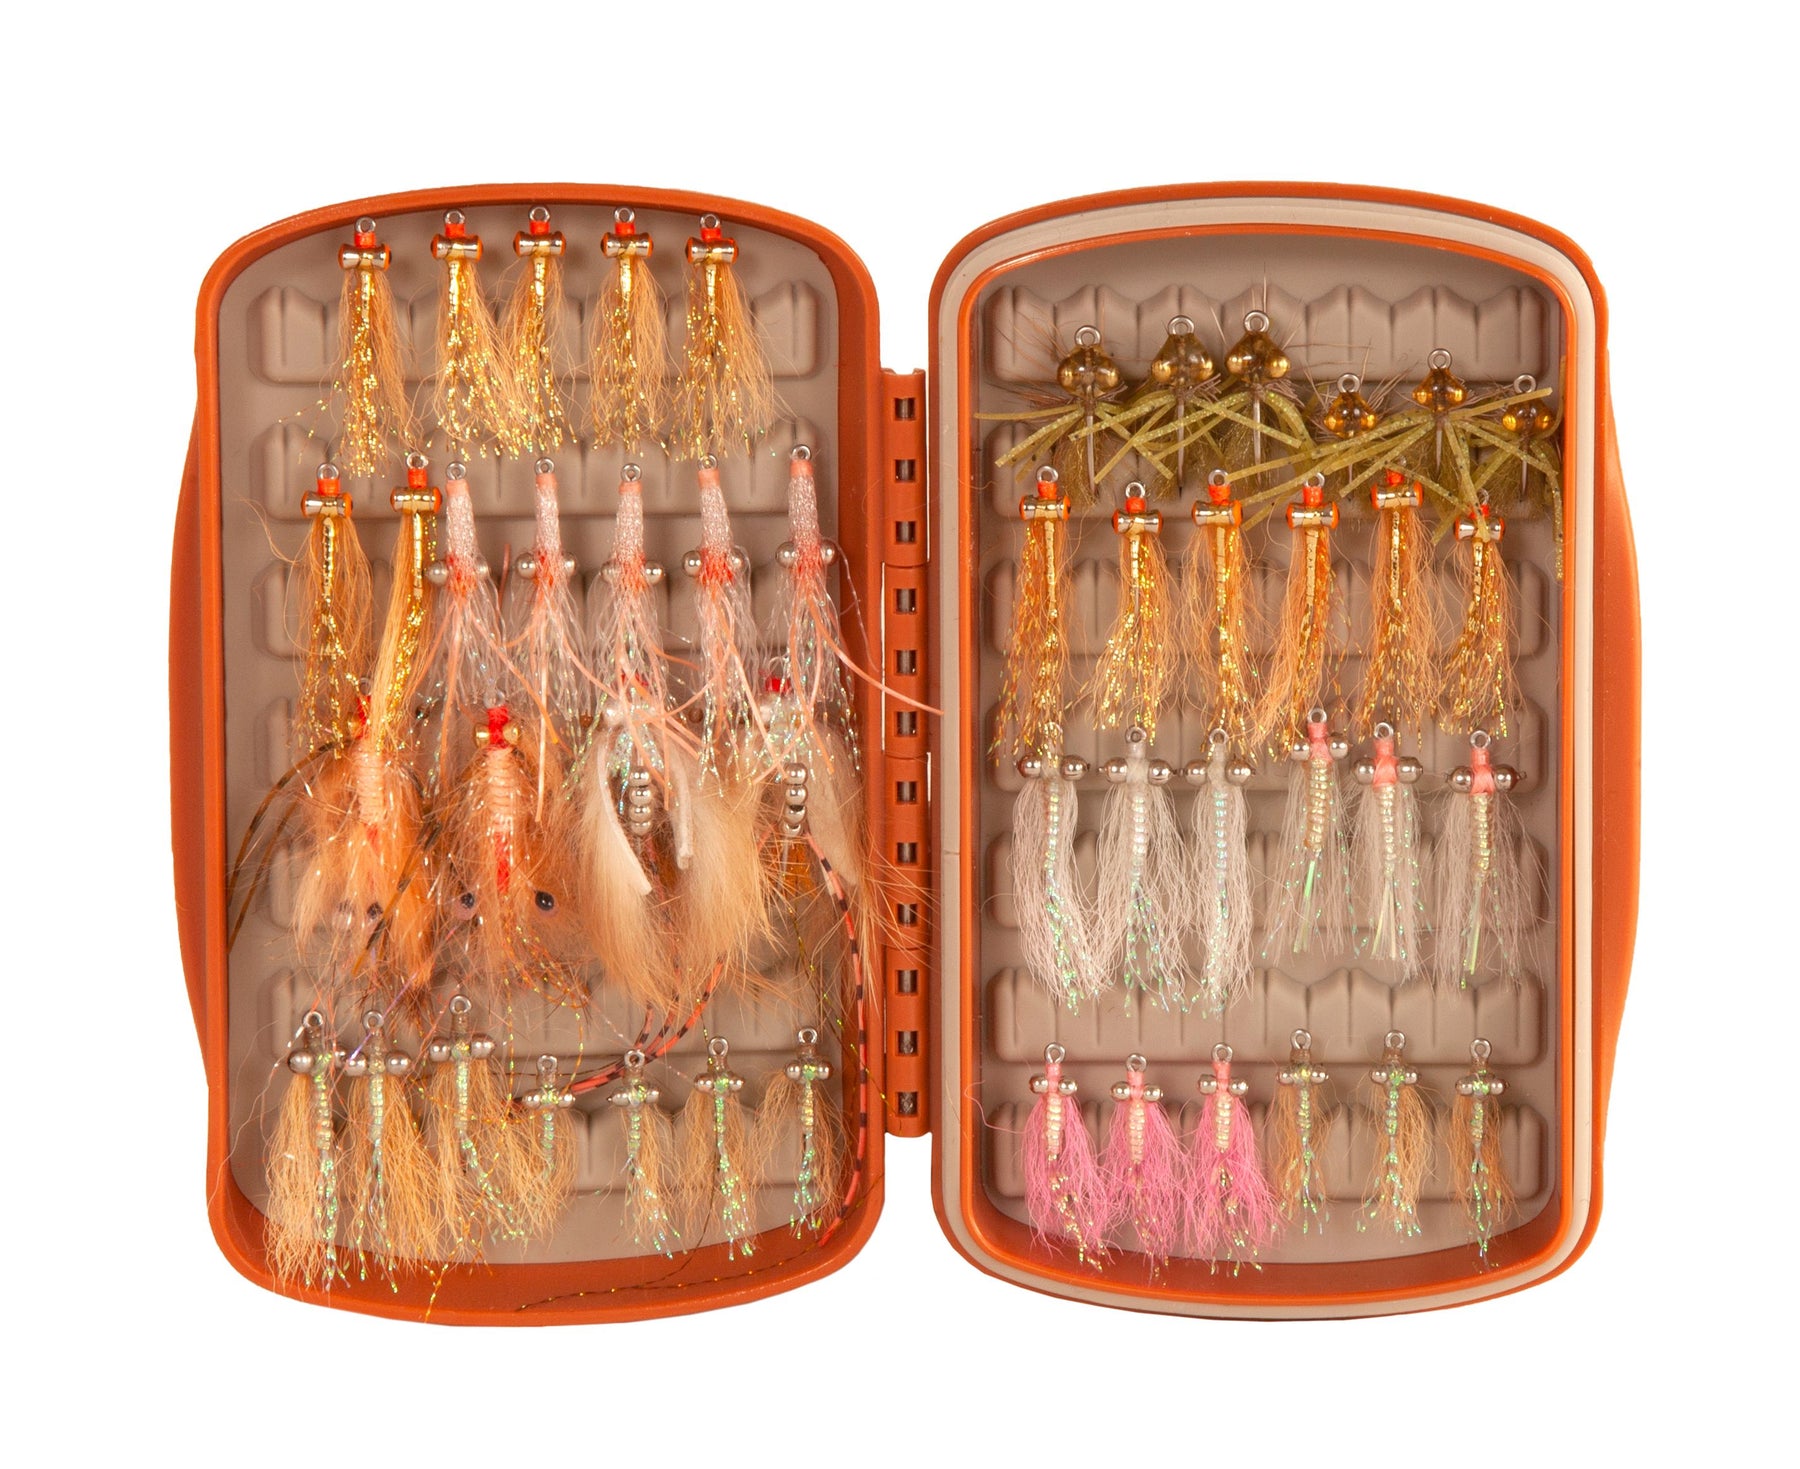 Fishpond Tacky Fly Puck, Tacky Fly Boxes Online, Fly Fishing Flies  Storage